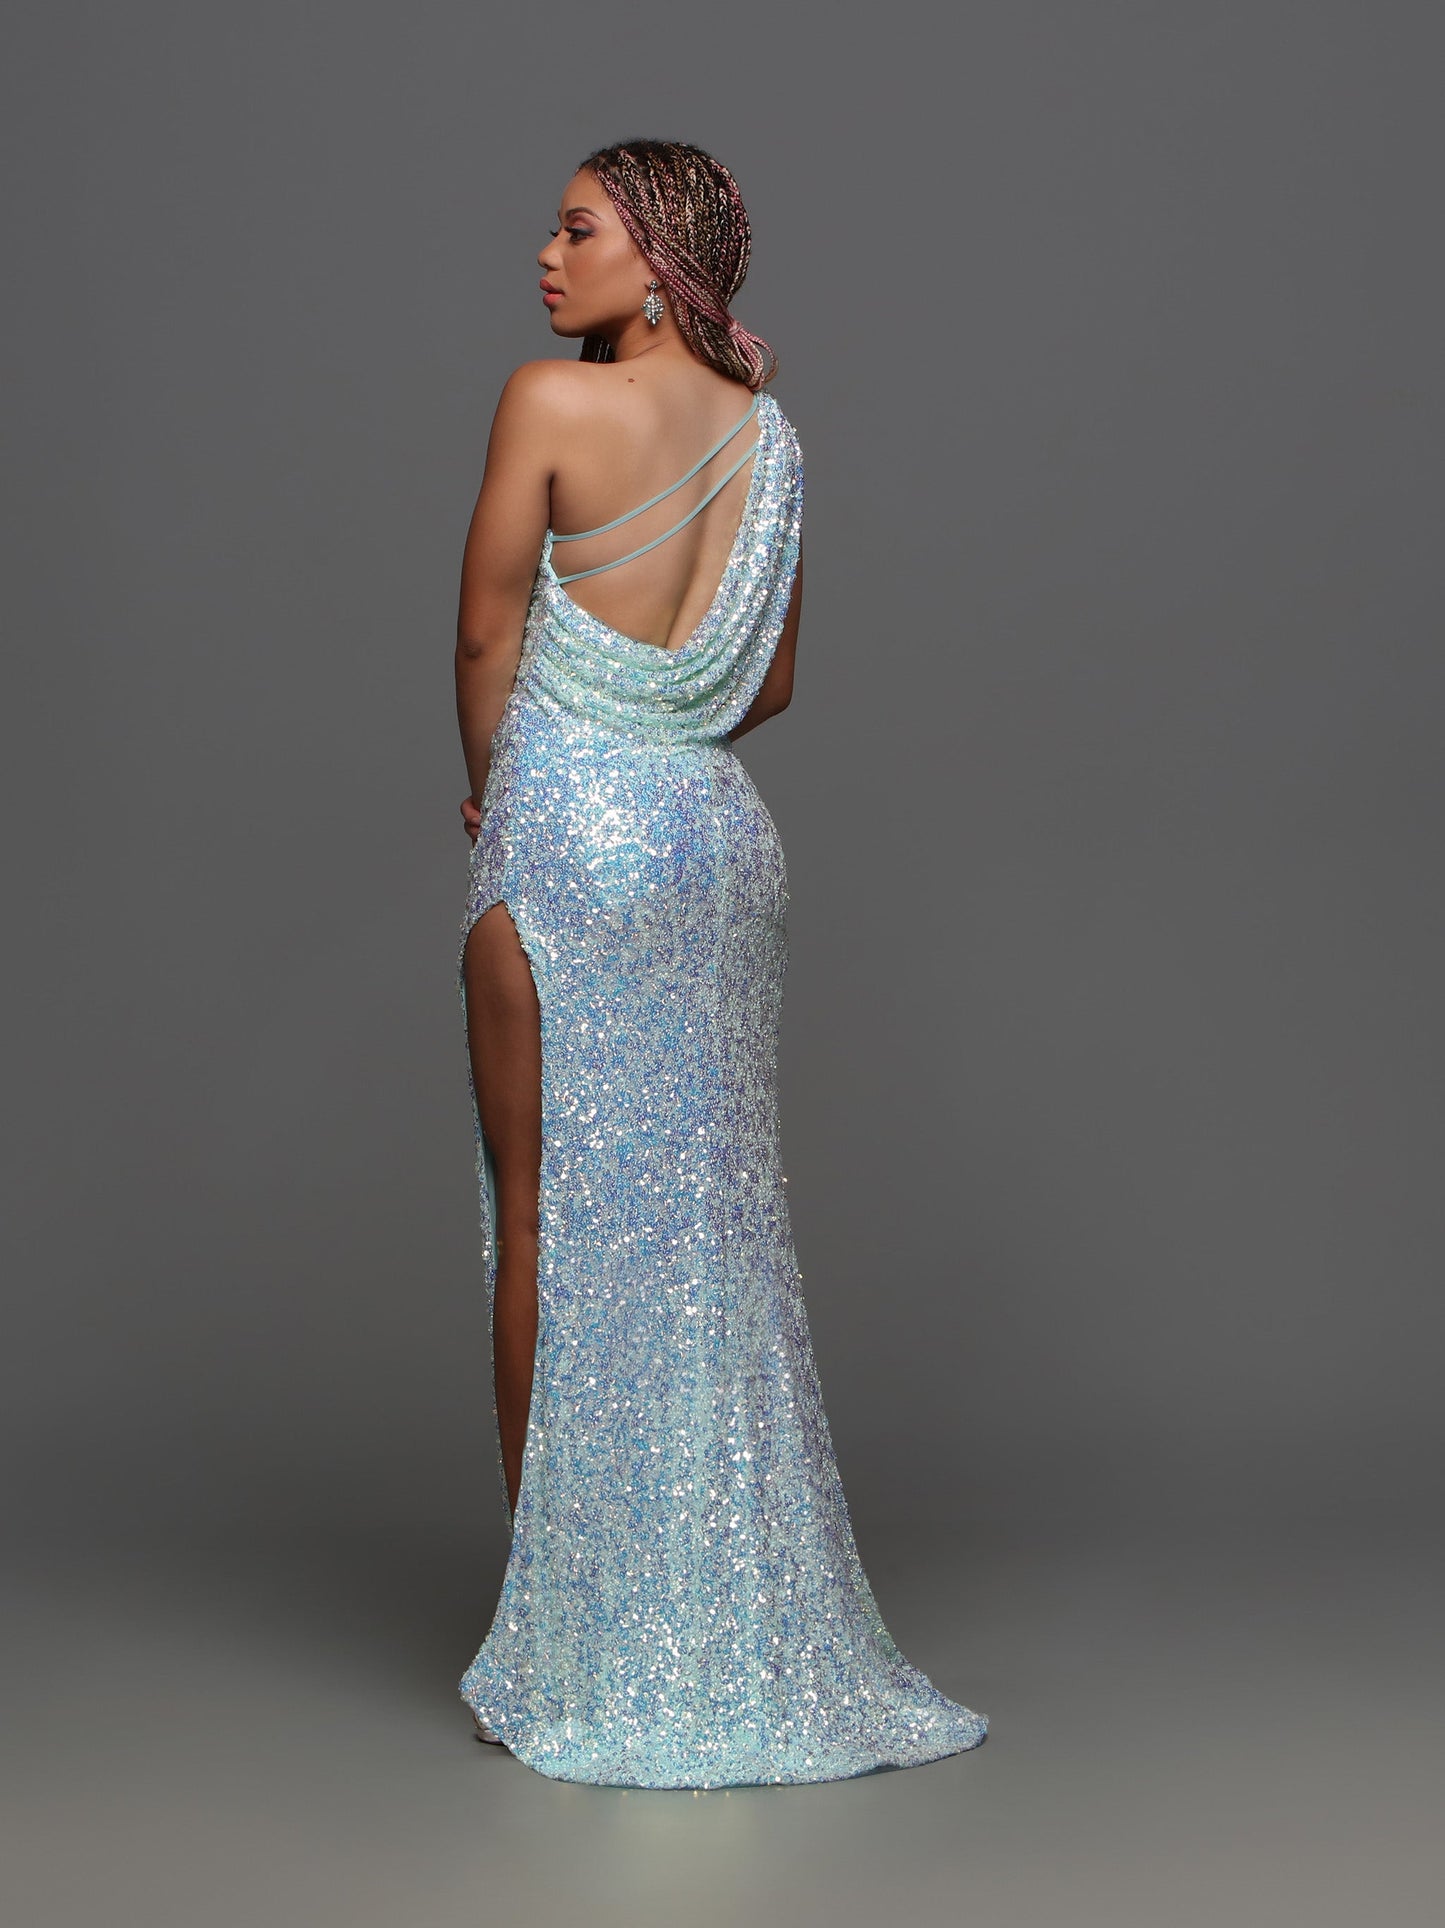 The Candice Wang 72346 prom dress boasts stunning sequins, a one shoulder design, and a high slit for an elegant and alluring look. With a draped open back, this formal gown exudes sophistication and glamour. Step out in style and turn heads at your next special occasion.  Sizes: 4-12  Colors: Aqua